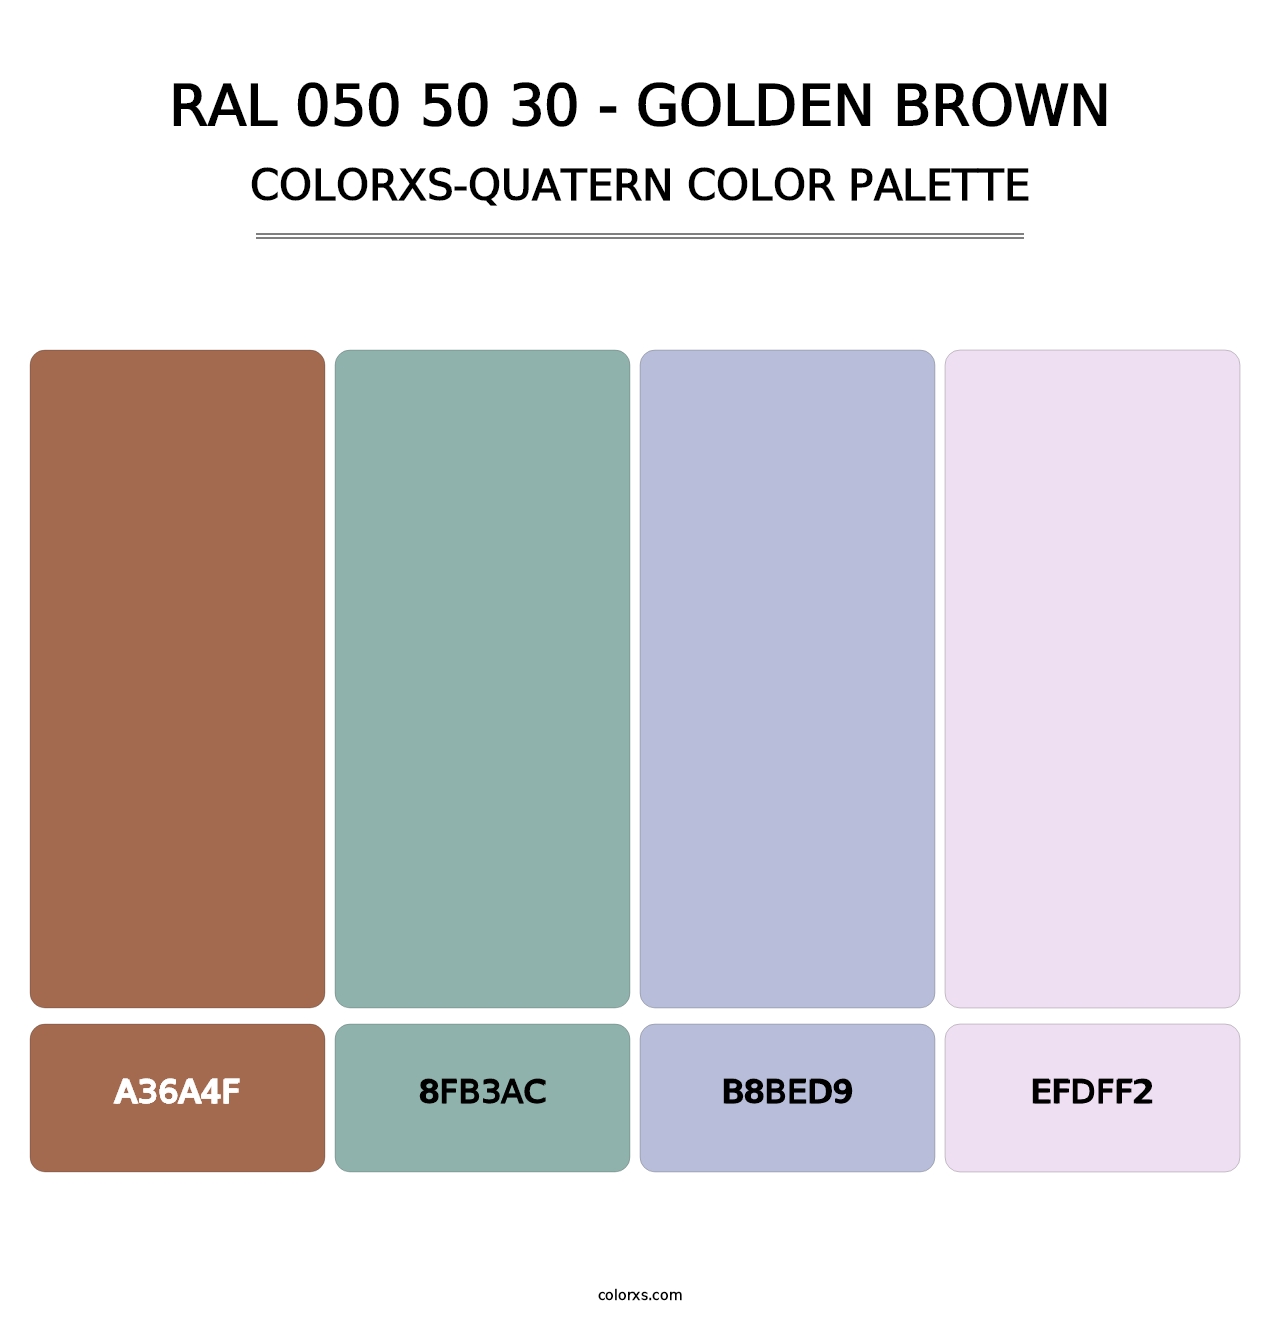 RAL 050 50 30 - Golden Brown - Colorxs Quatern Palette